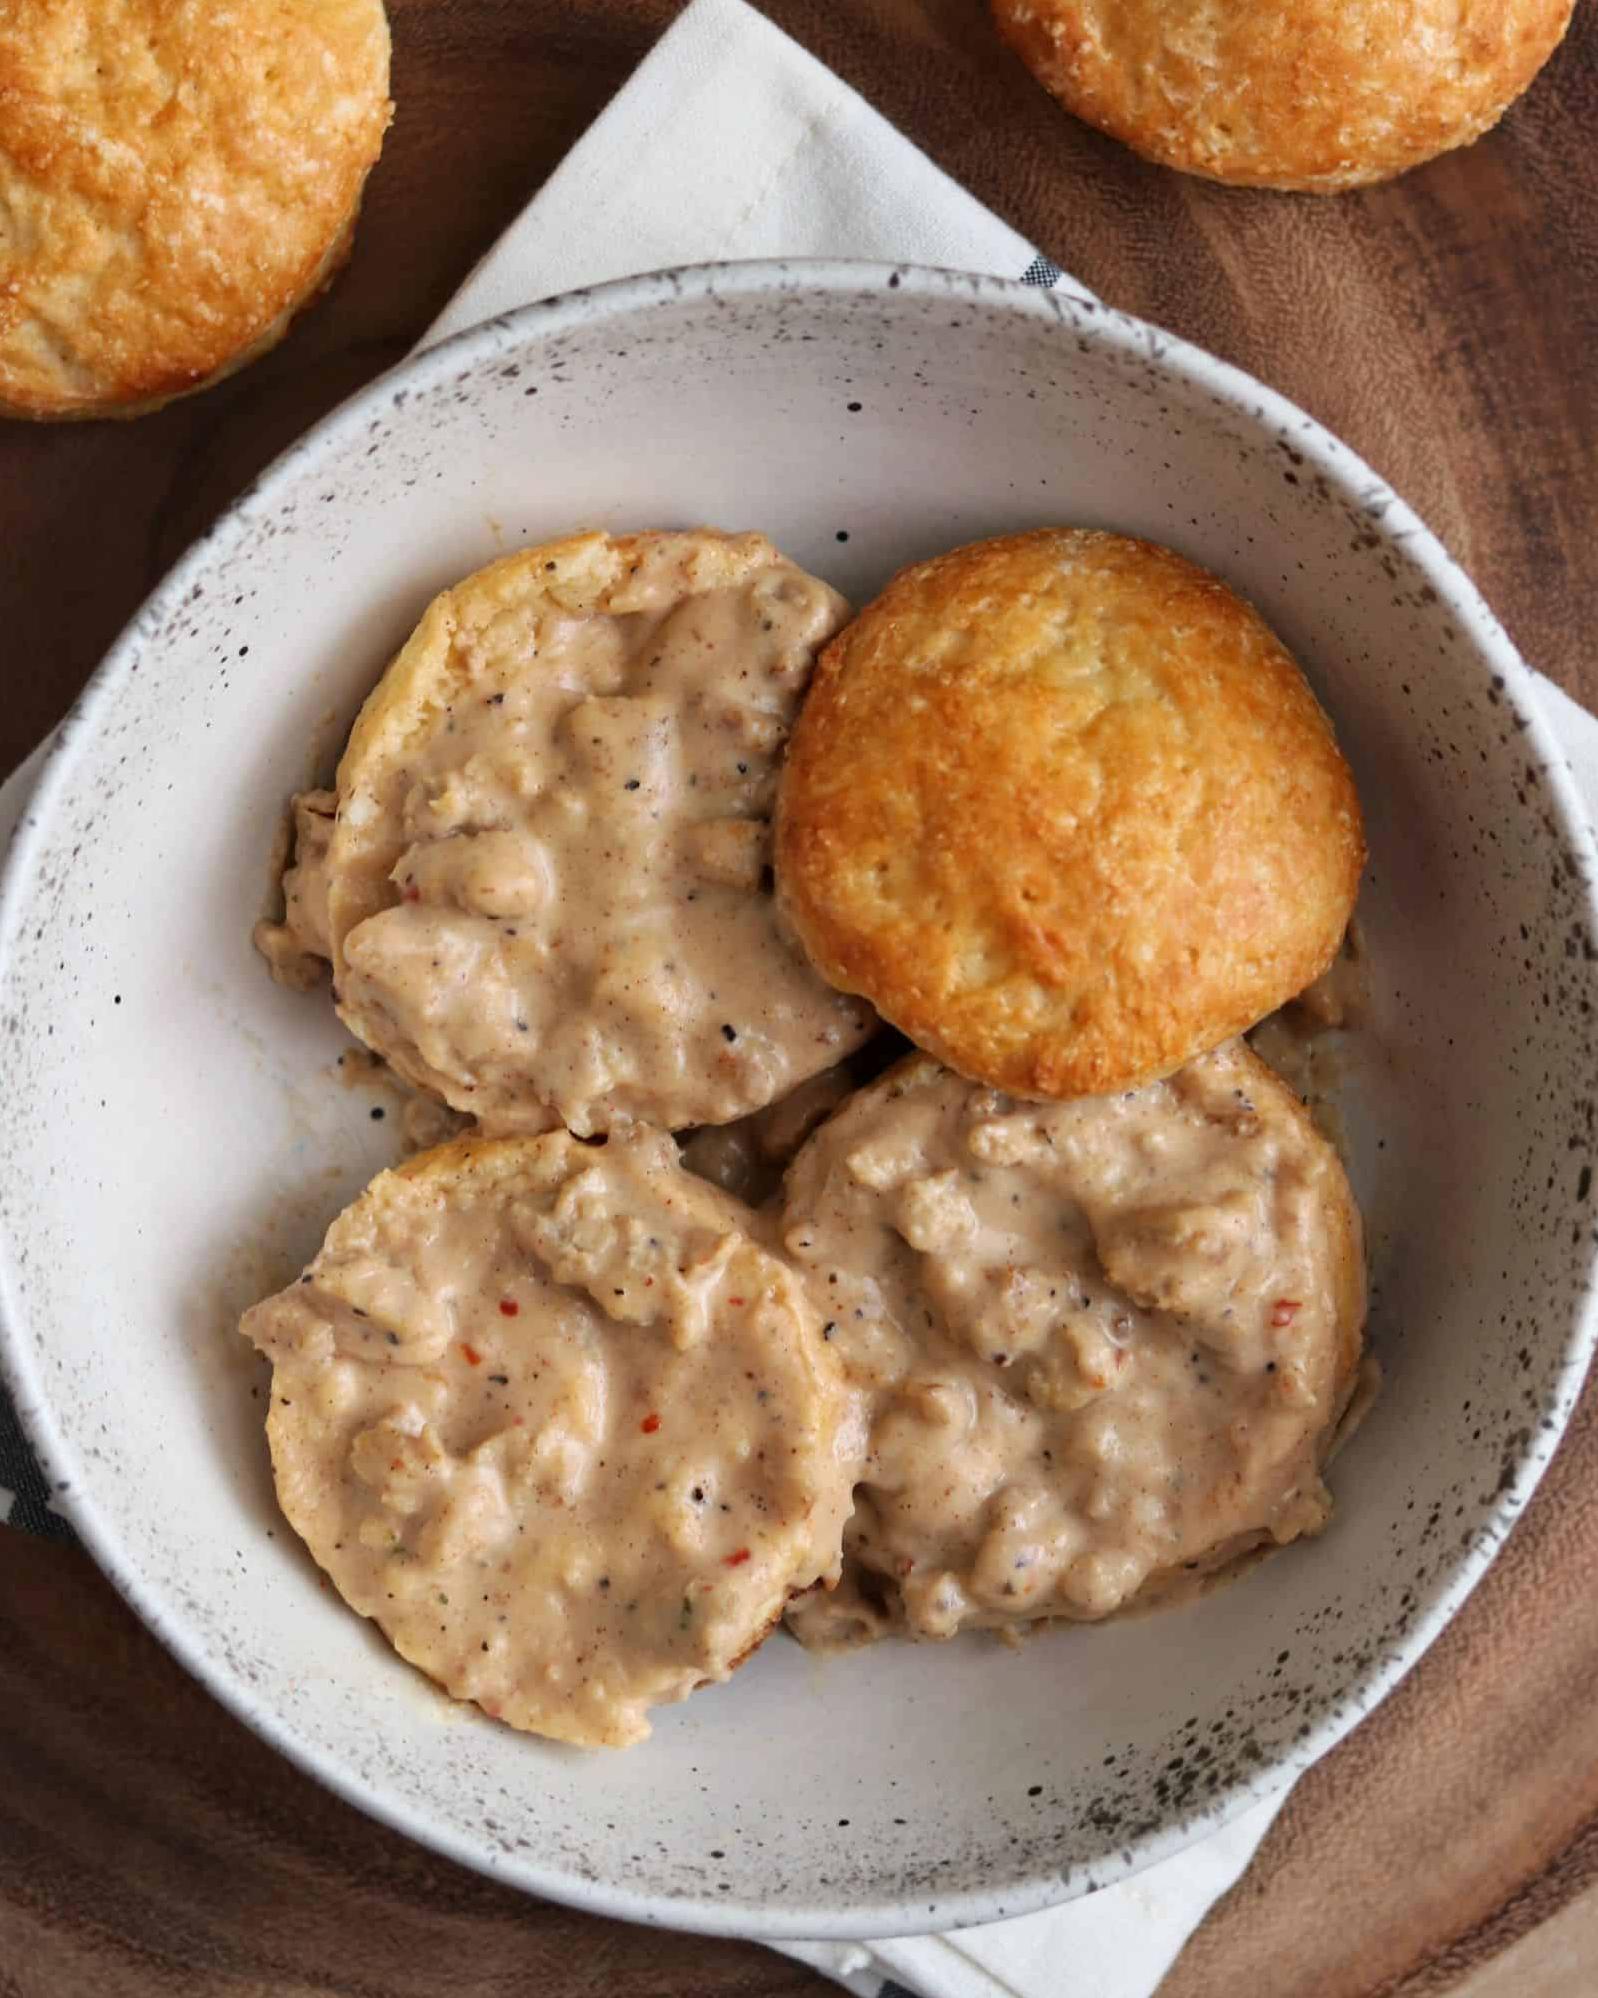  Drizzle this lip-smacking gravy over fluffy biscuits for a meal to remember